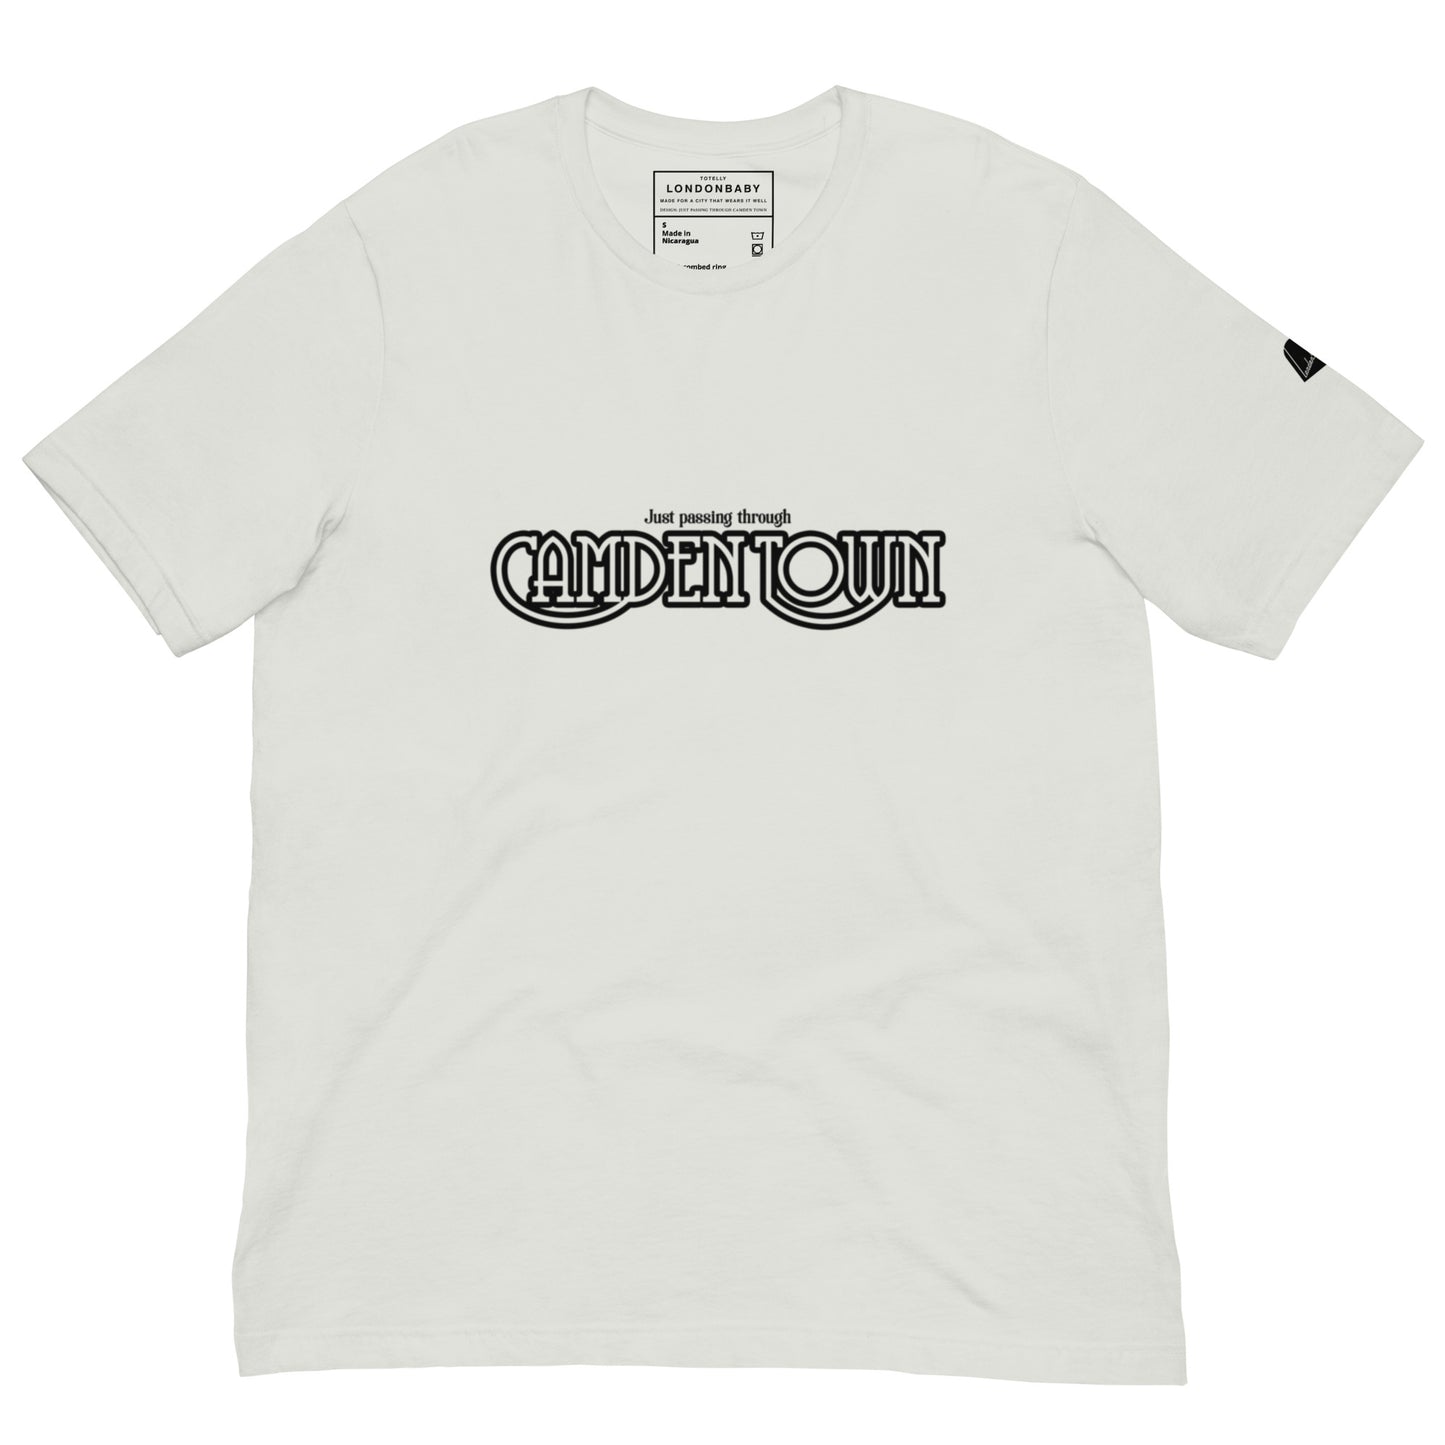 LondonBaby 100% cotton Just Passing Through Camden Town vintage-style T-shirt - Front